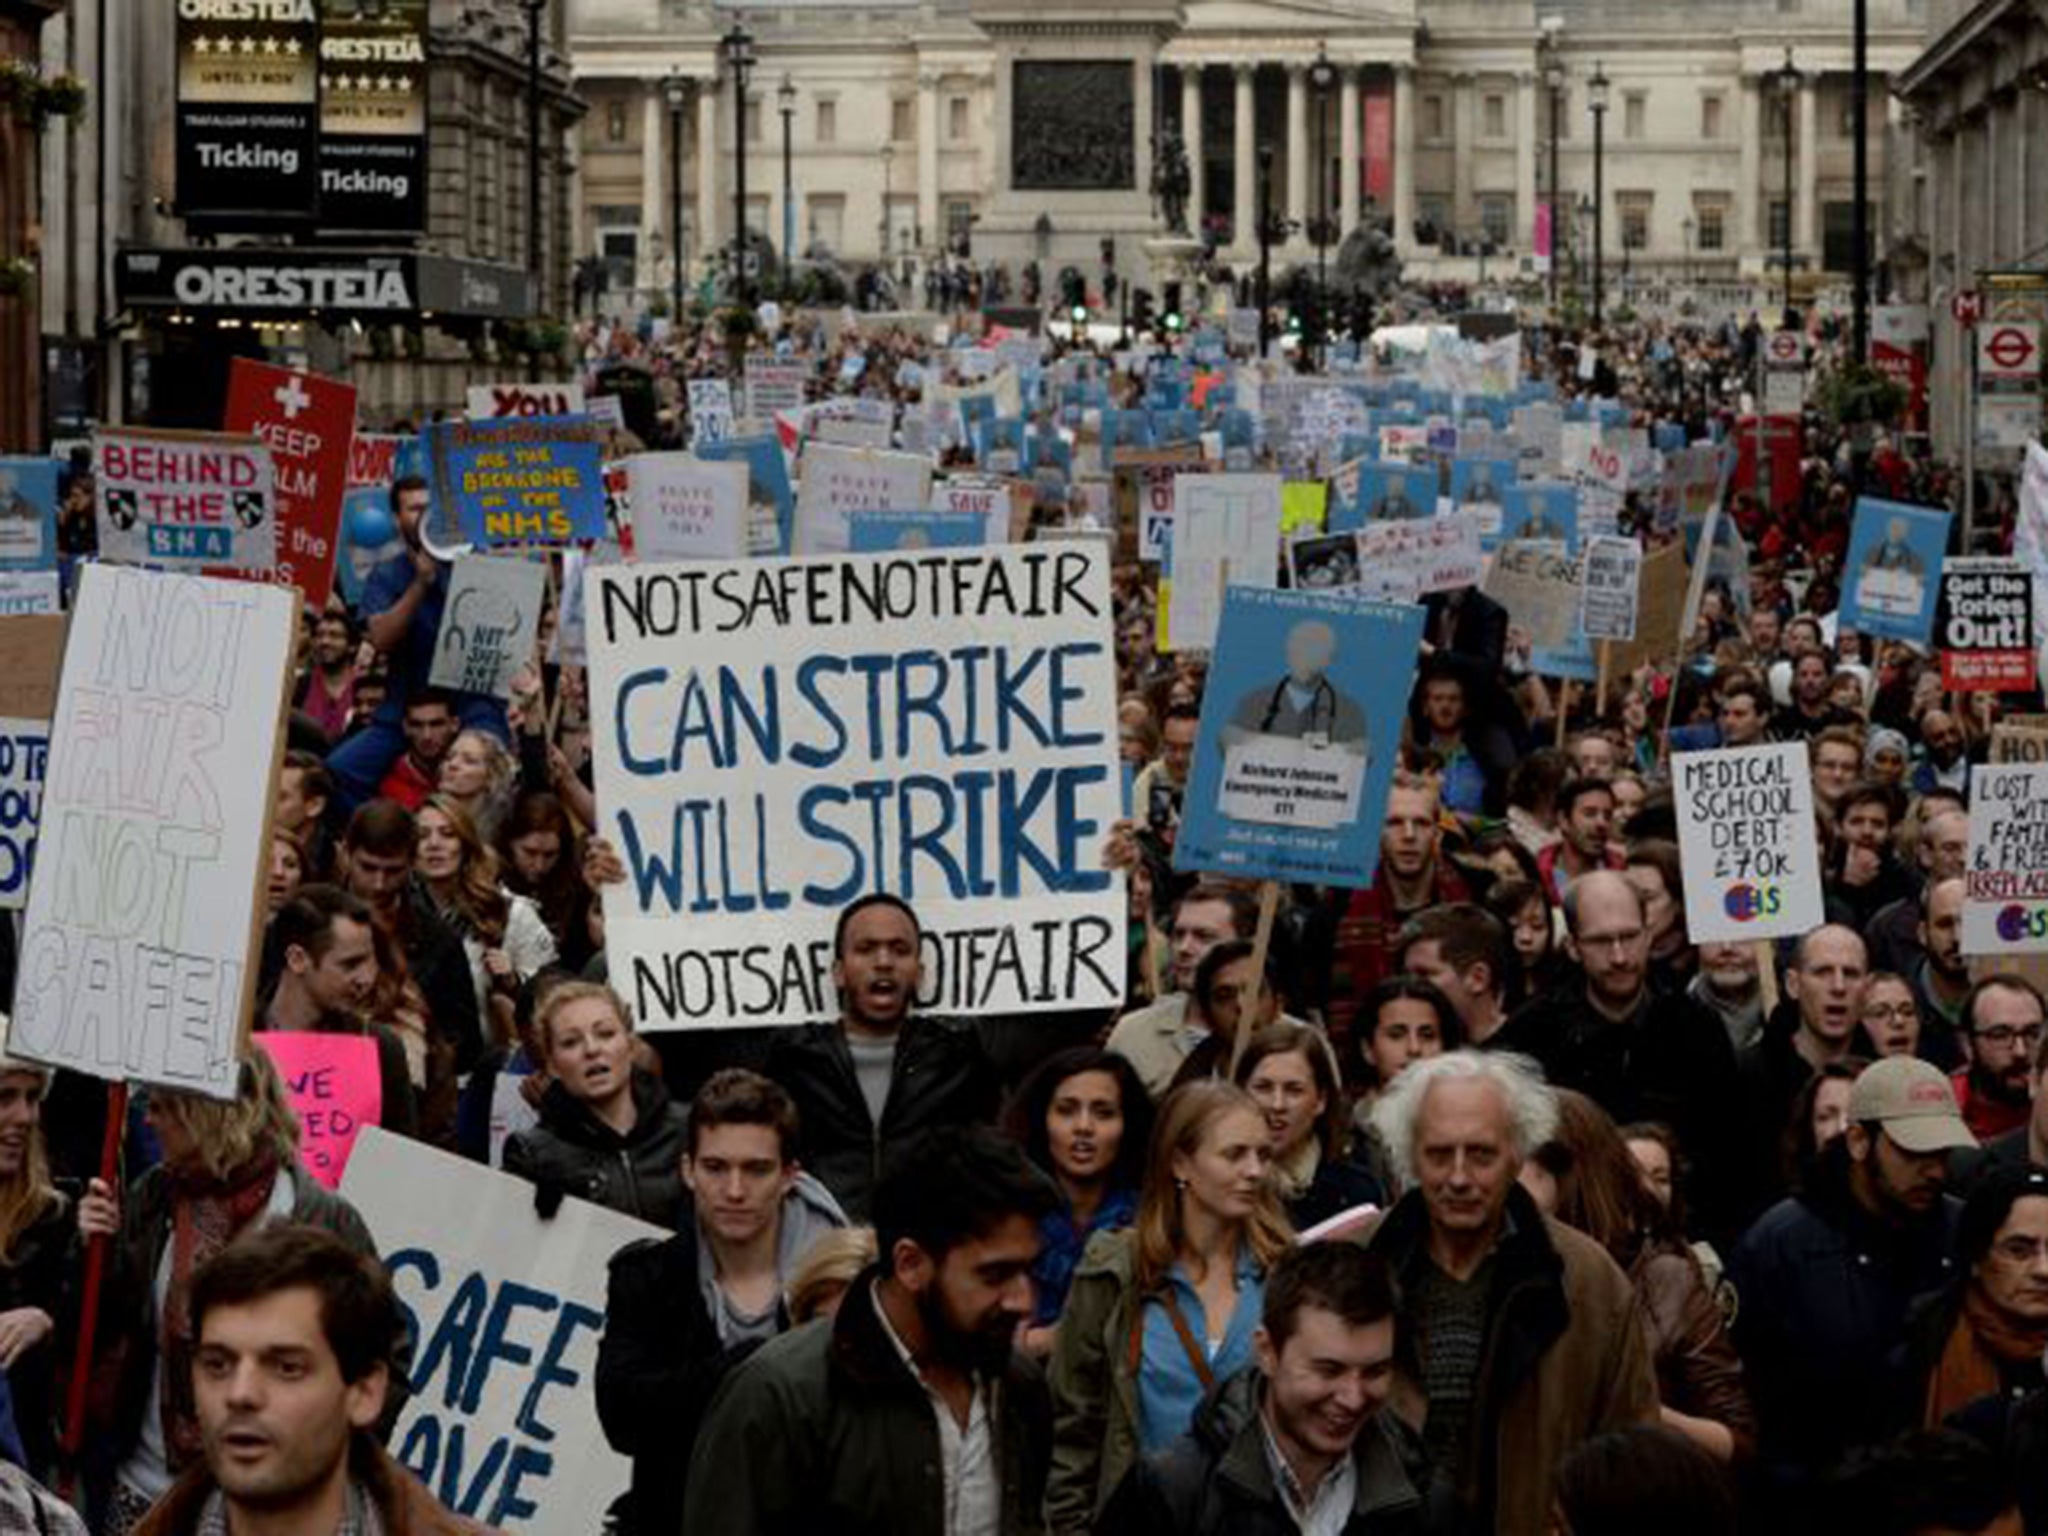 Demonstrators march down Whitehall during the 'Let's Save the NHS' rally in October